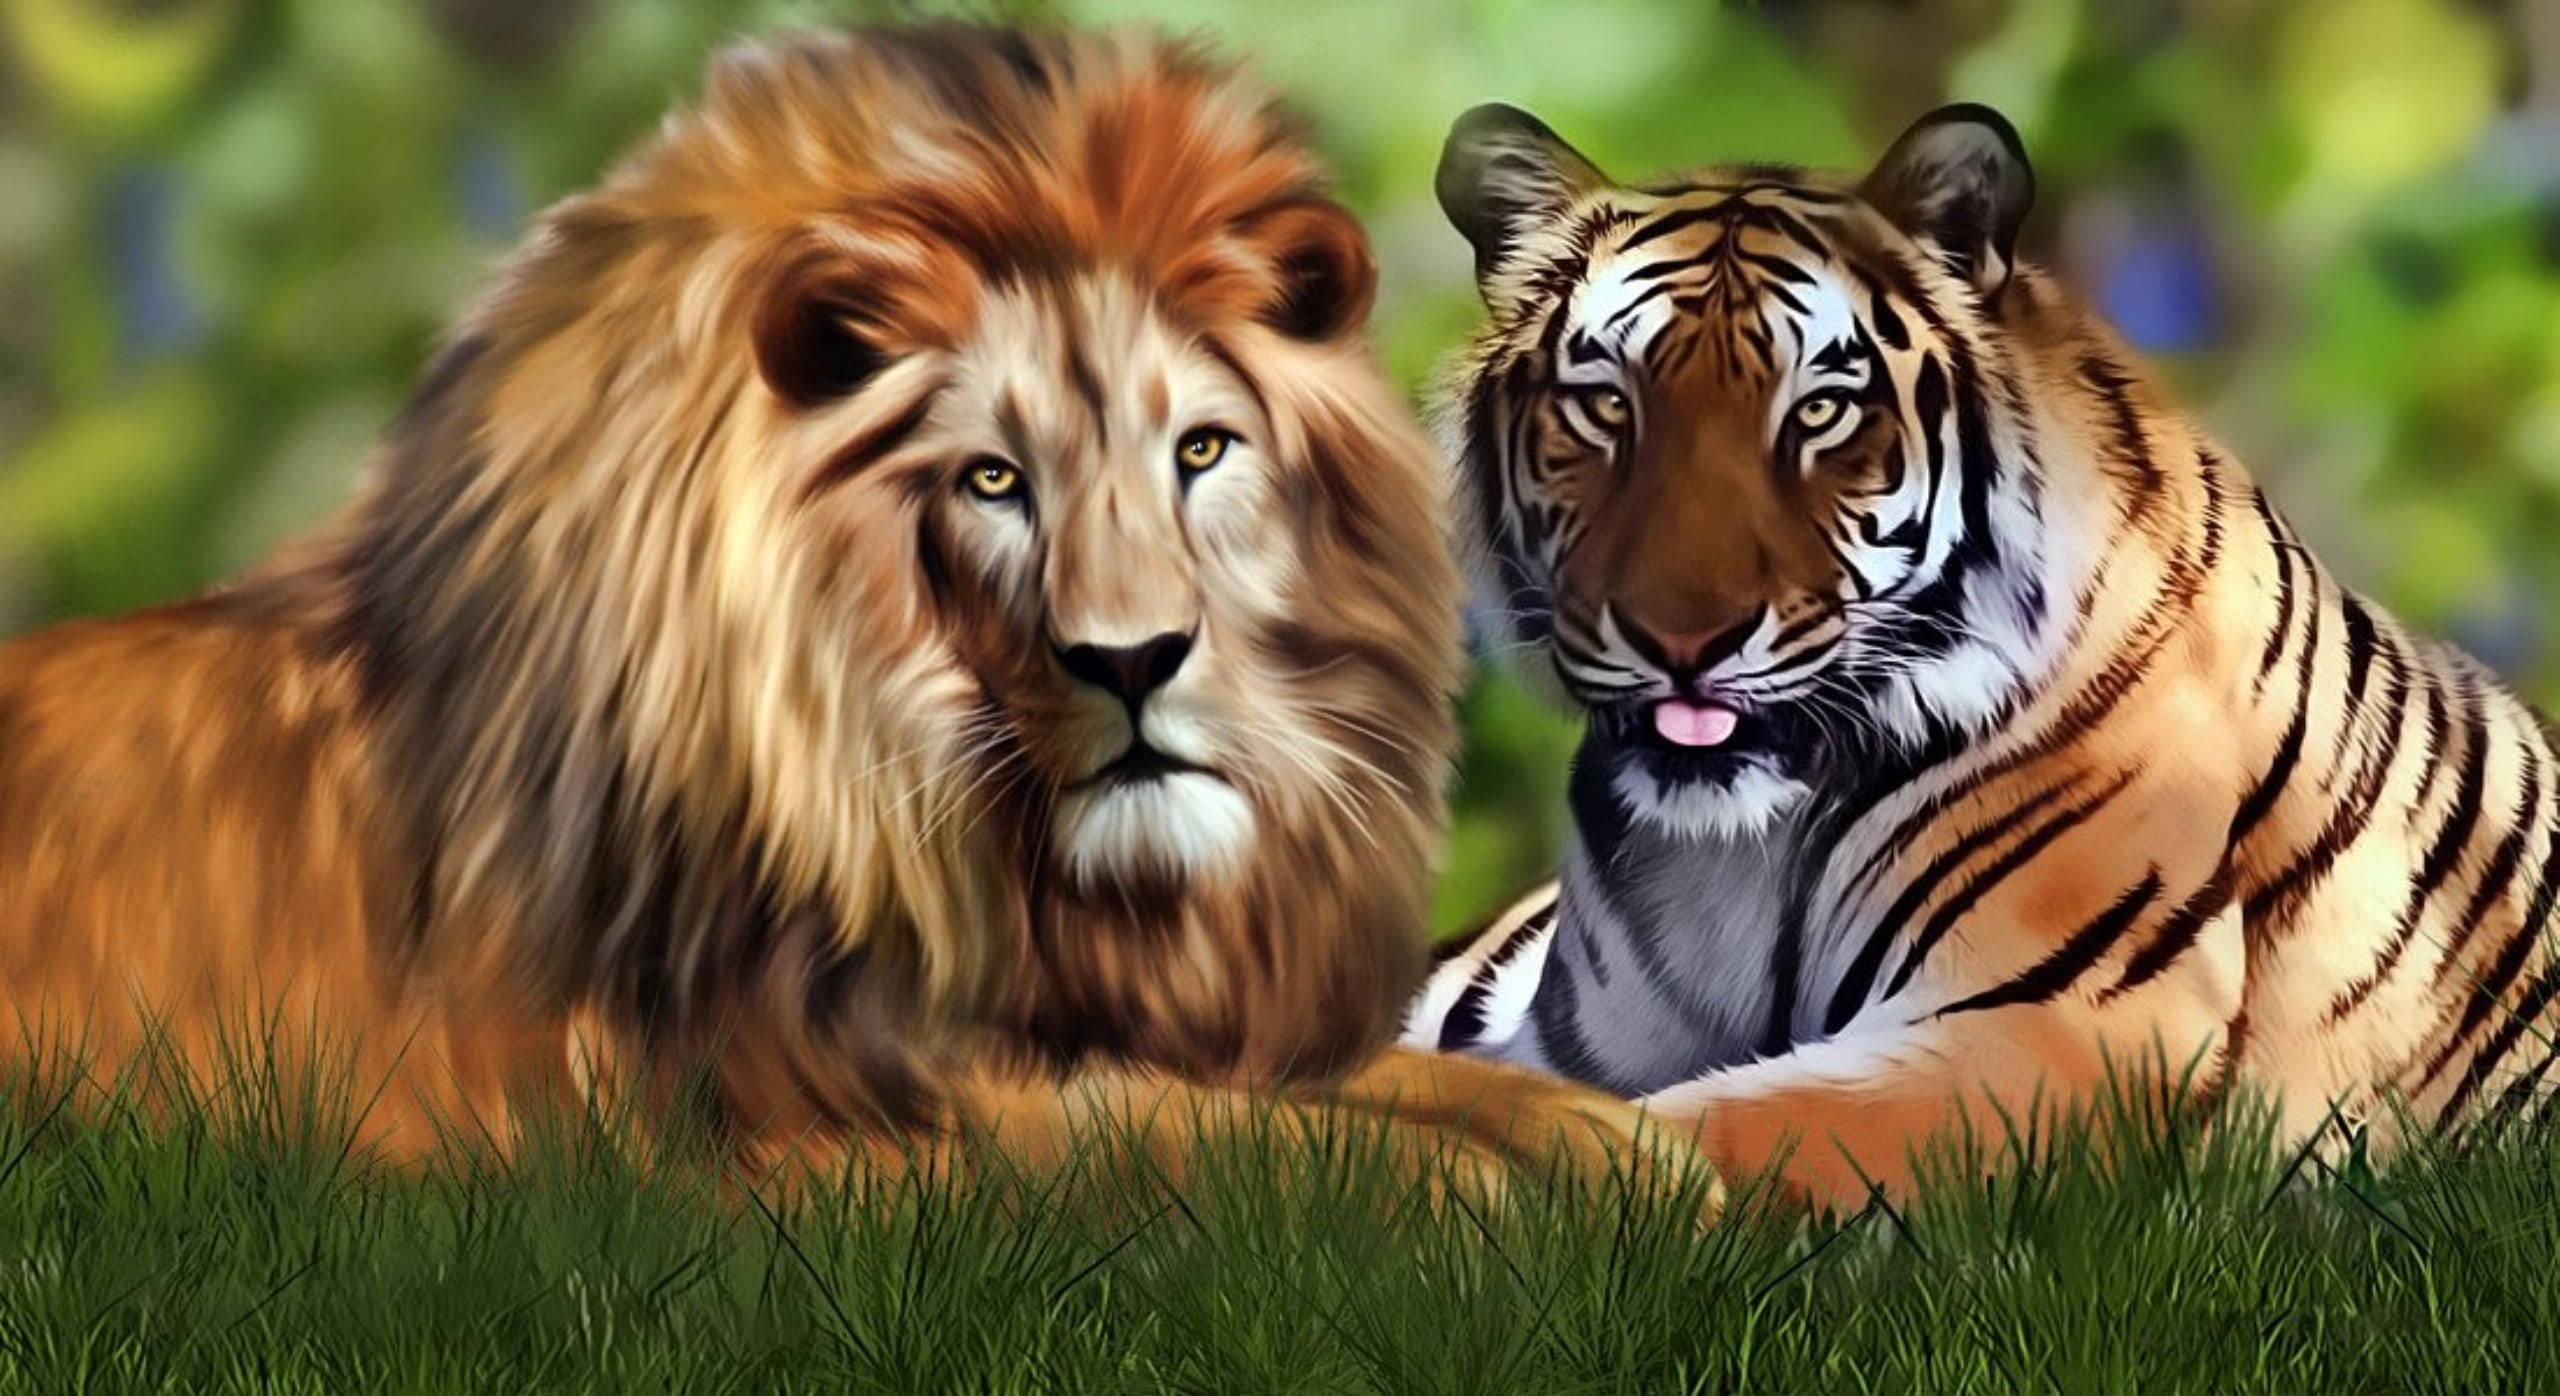 Lion And Tiger Art In Grass Background